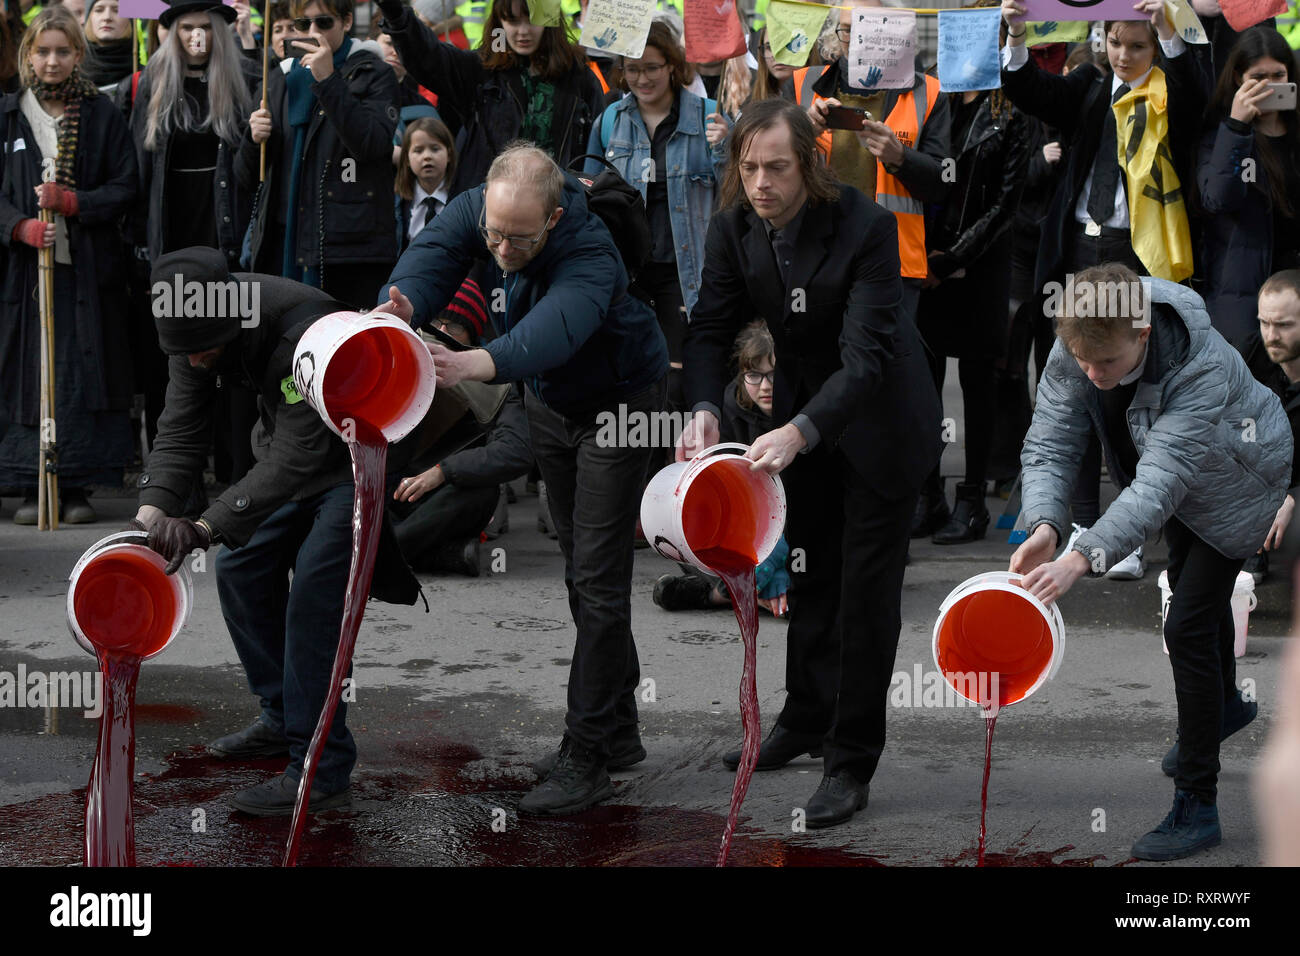 Extinction Rebellion activists pouring buckets of fake blood outside Downing Street.  Hundreds of activists from the Extinction Rebellion climate change movement gathered at Parliament Square, marched to Downing Street, and poured 200 litres of fake blood on the ground. This act of non-violent civil disobedience was carried out to demand from the government direct actions to reduce carbon emissions to zero by 2025, speak the truth about climate change and call for a national citizen’s assembly. For the activists, carrying buckets of “blood” to Downing street and spilling it symbolised the viol Stock Photo